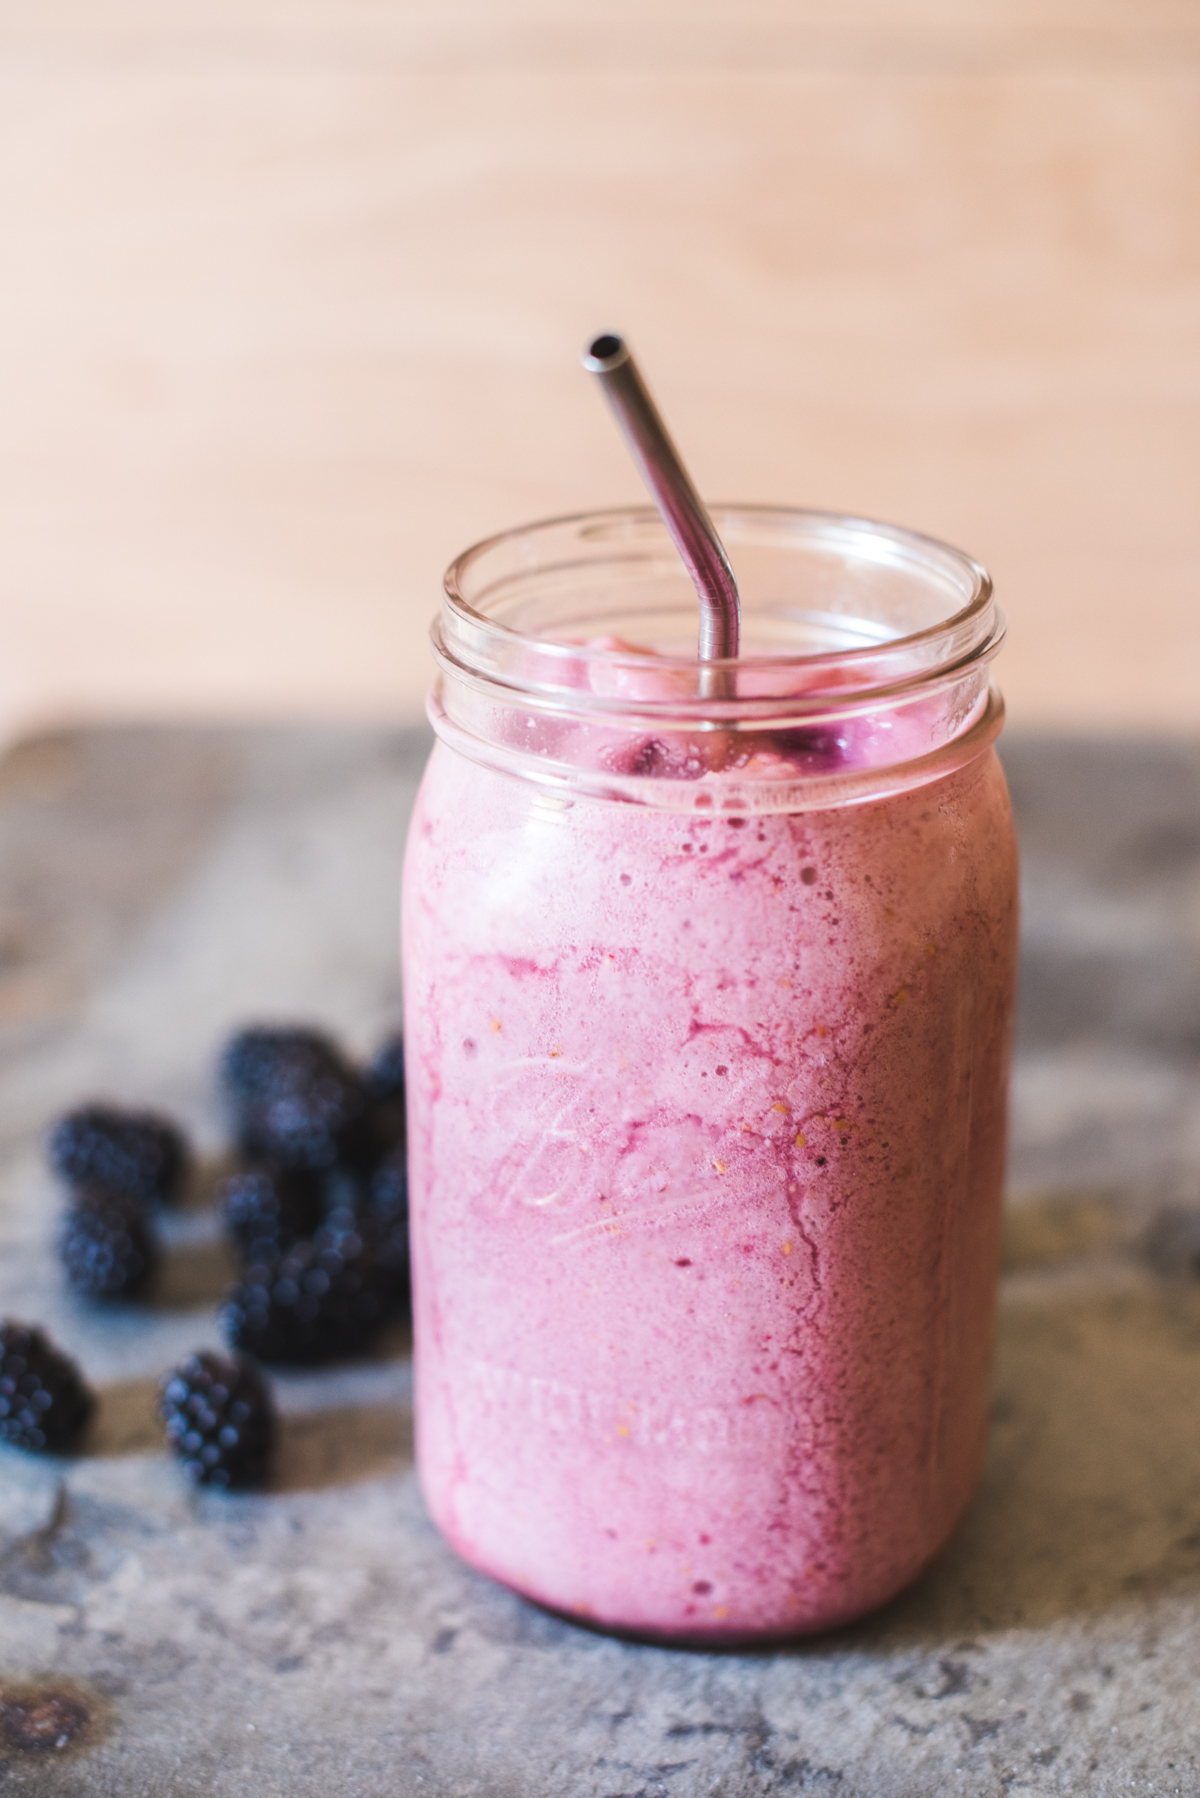 Frosted Vanilla Blackberry Lemonade Dairy-free, Sugar-free, Low-Carb, THM-FP